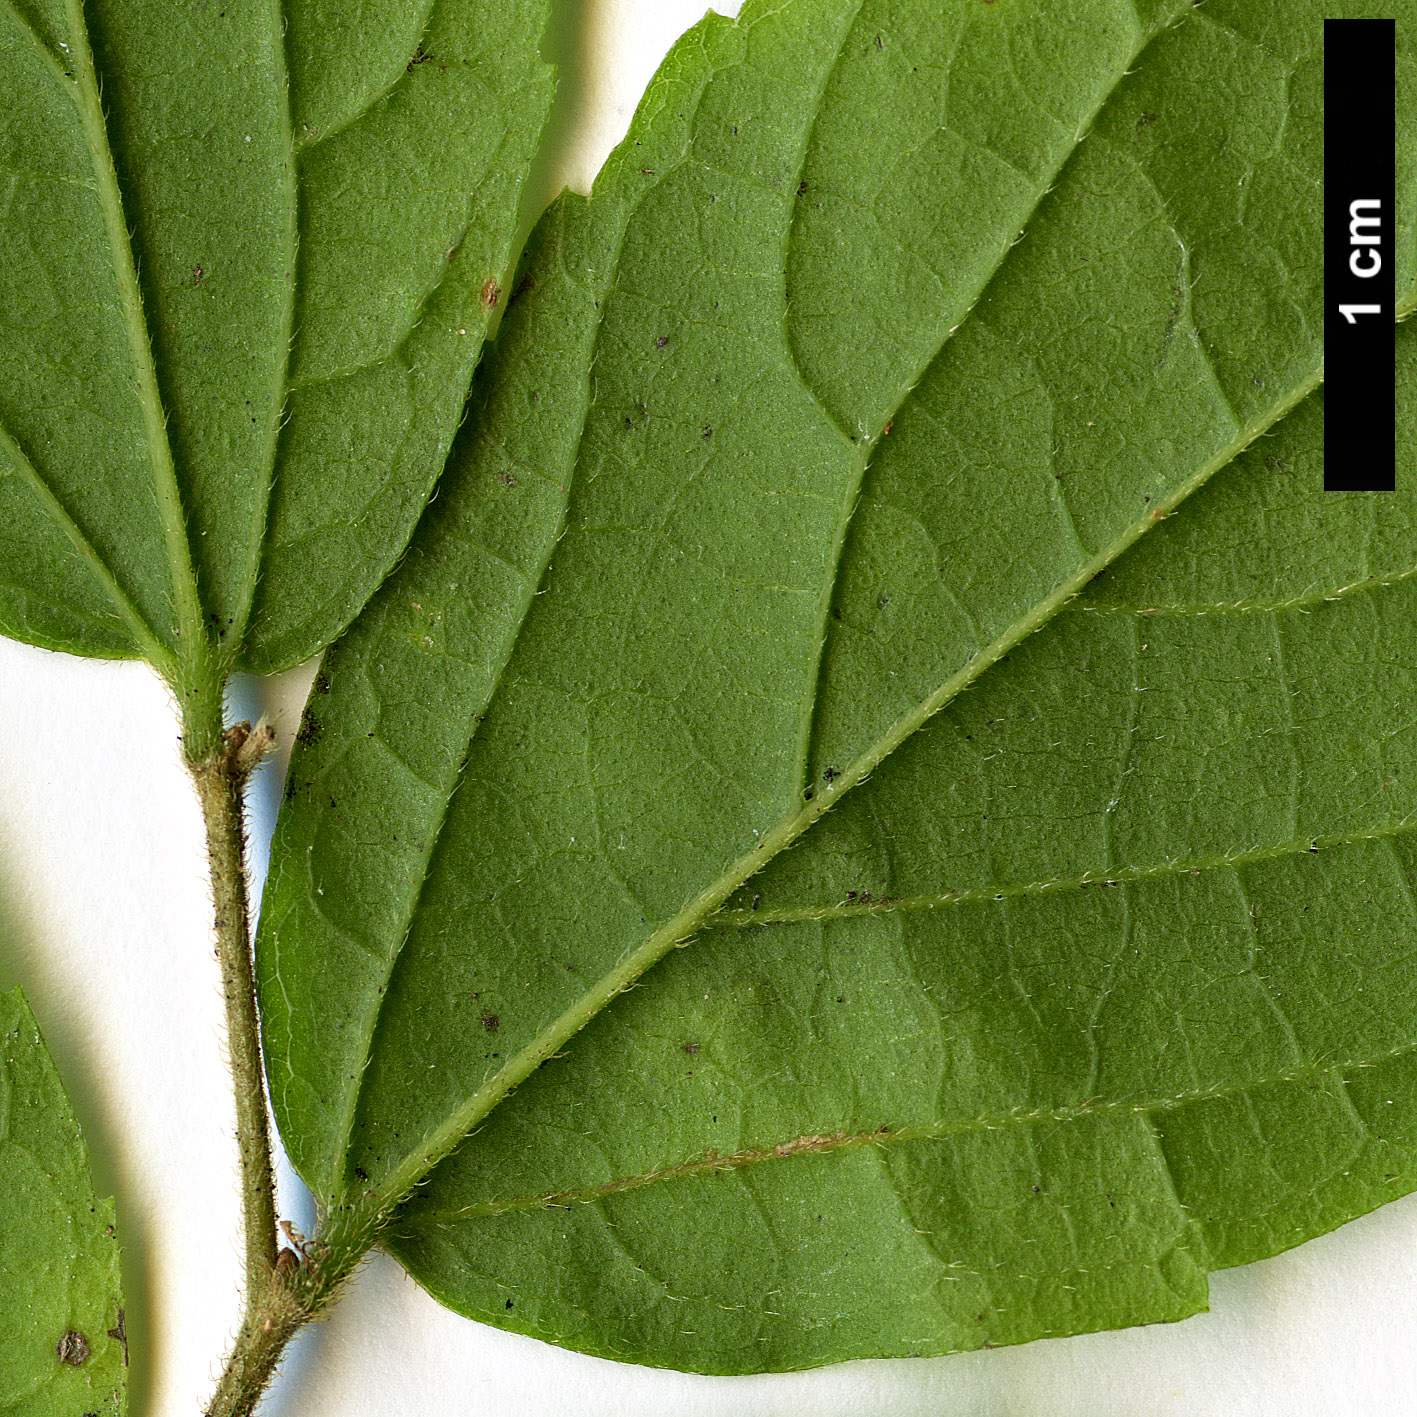 High resolution image: Family: Cannabaceae - Genus: Celtis - Taxon: africana